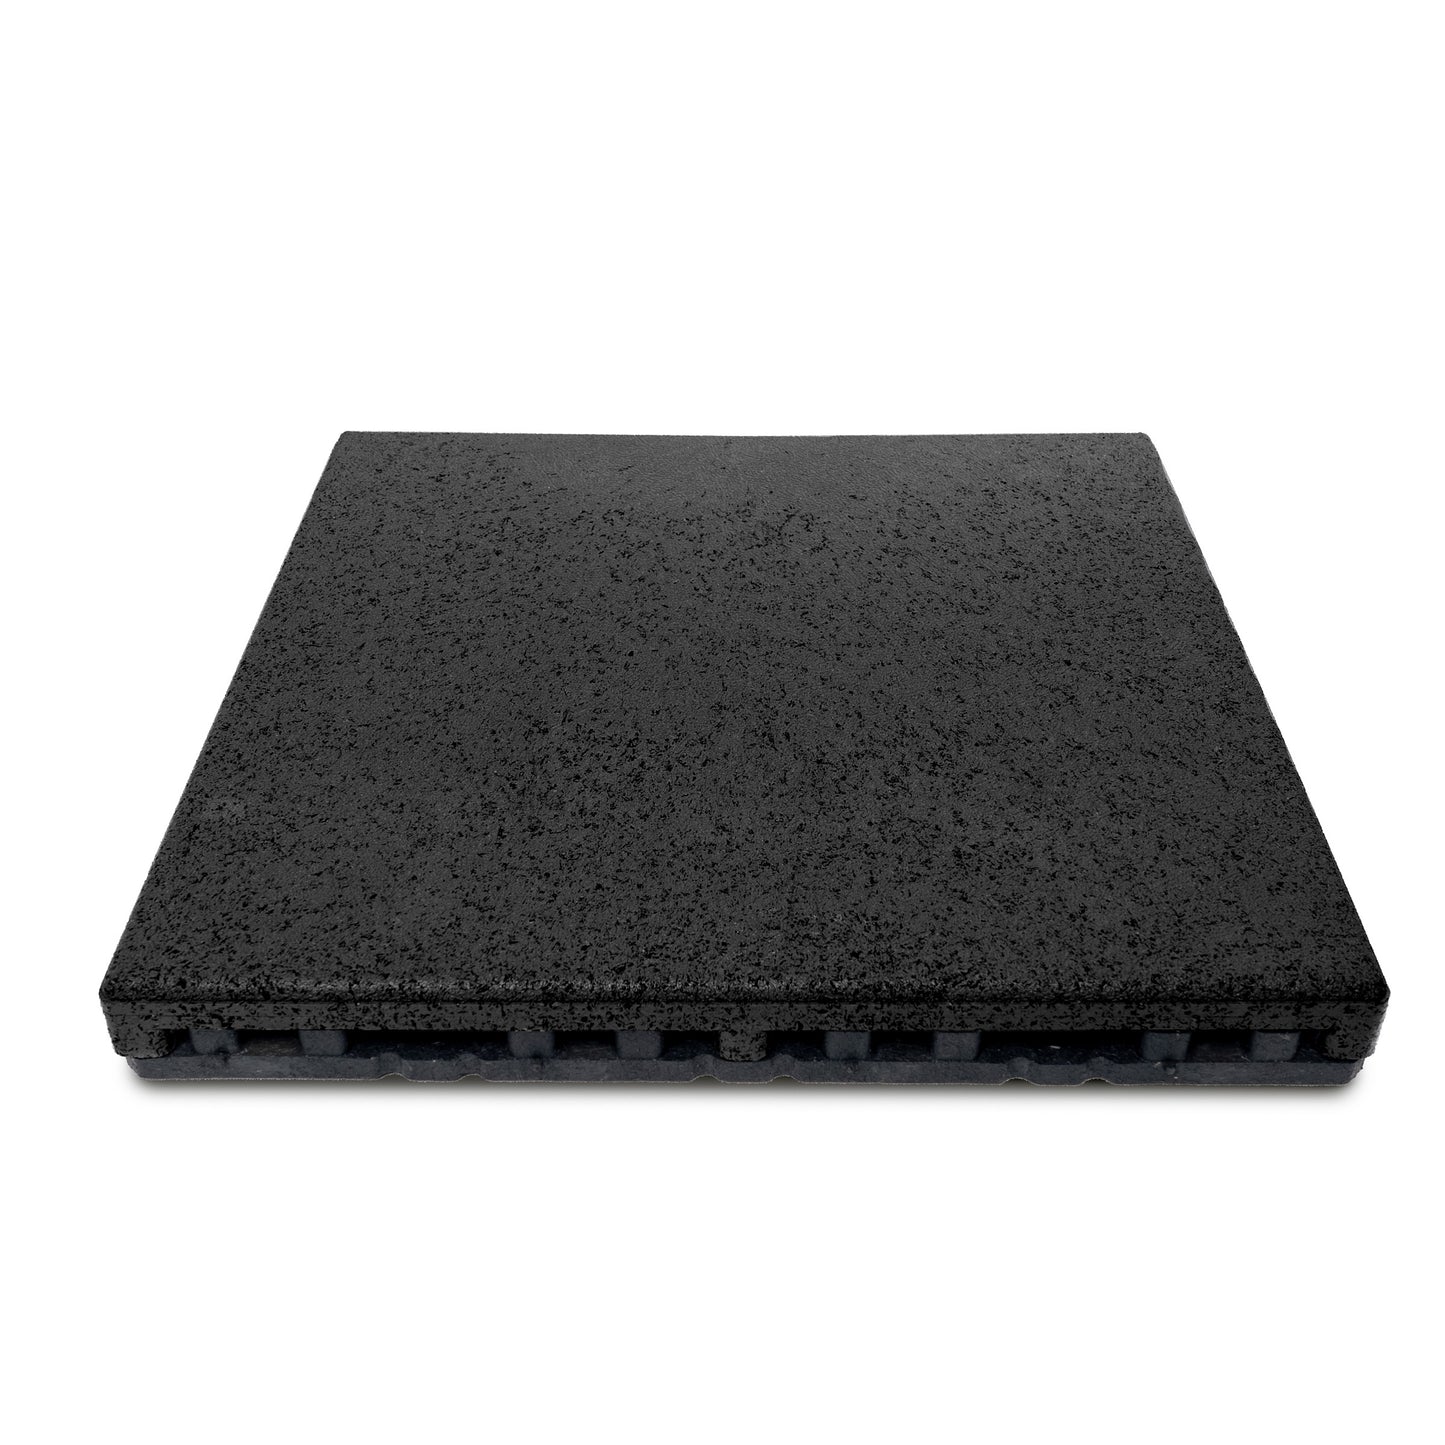 Aspire Paver with Grid (1 - 16" x 16" Paver on 16" x 16" Grid)